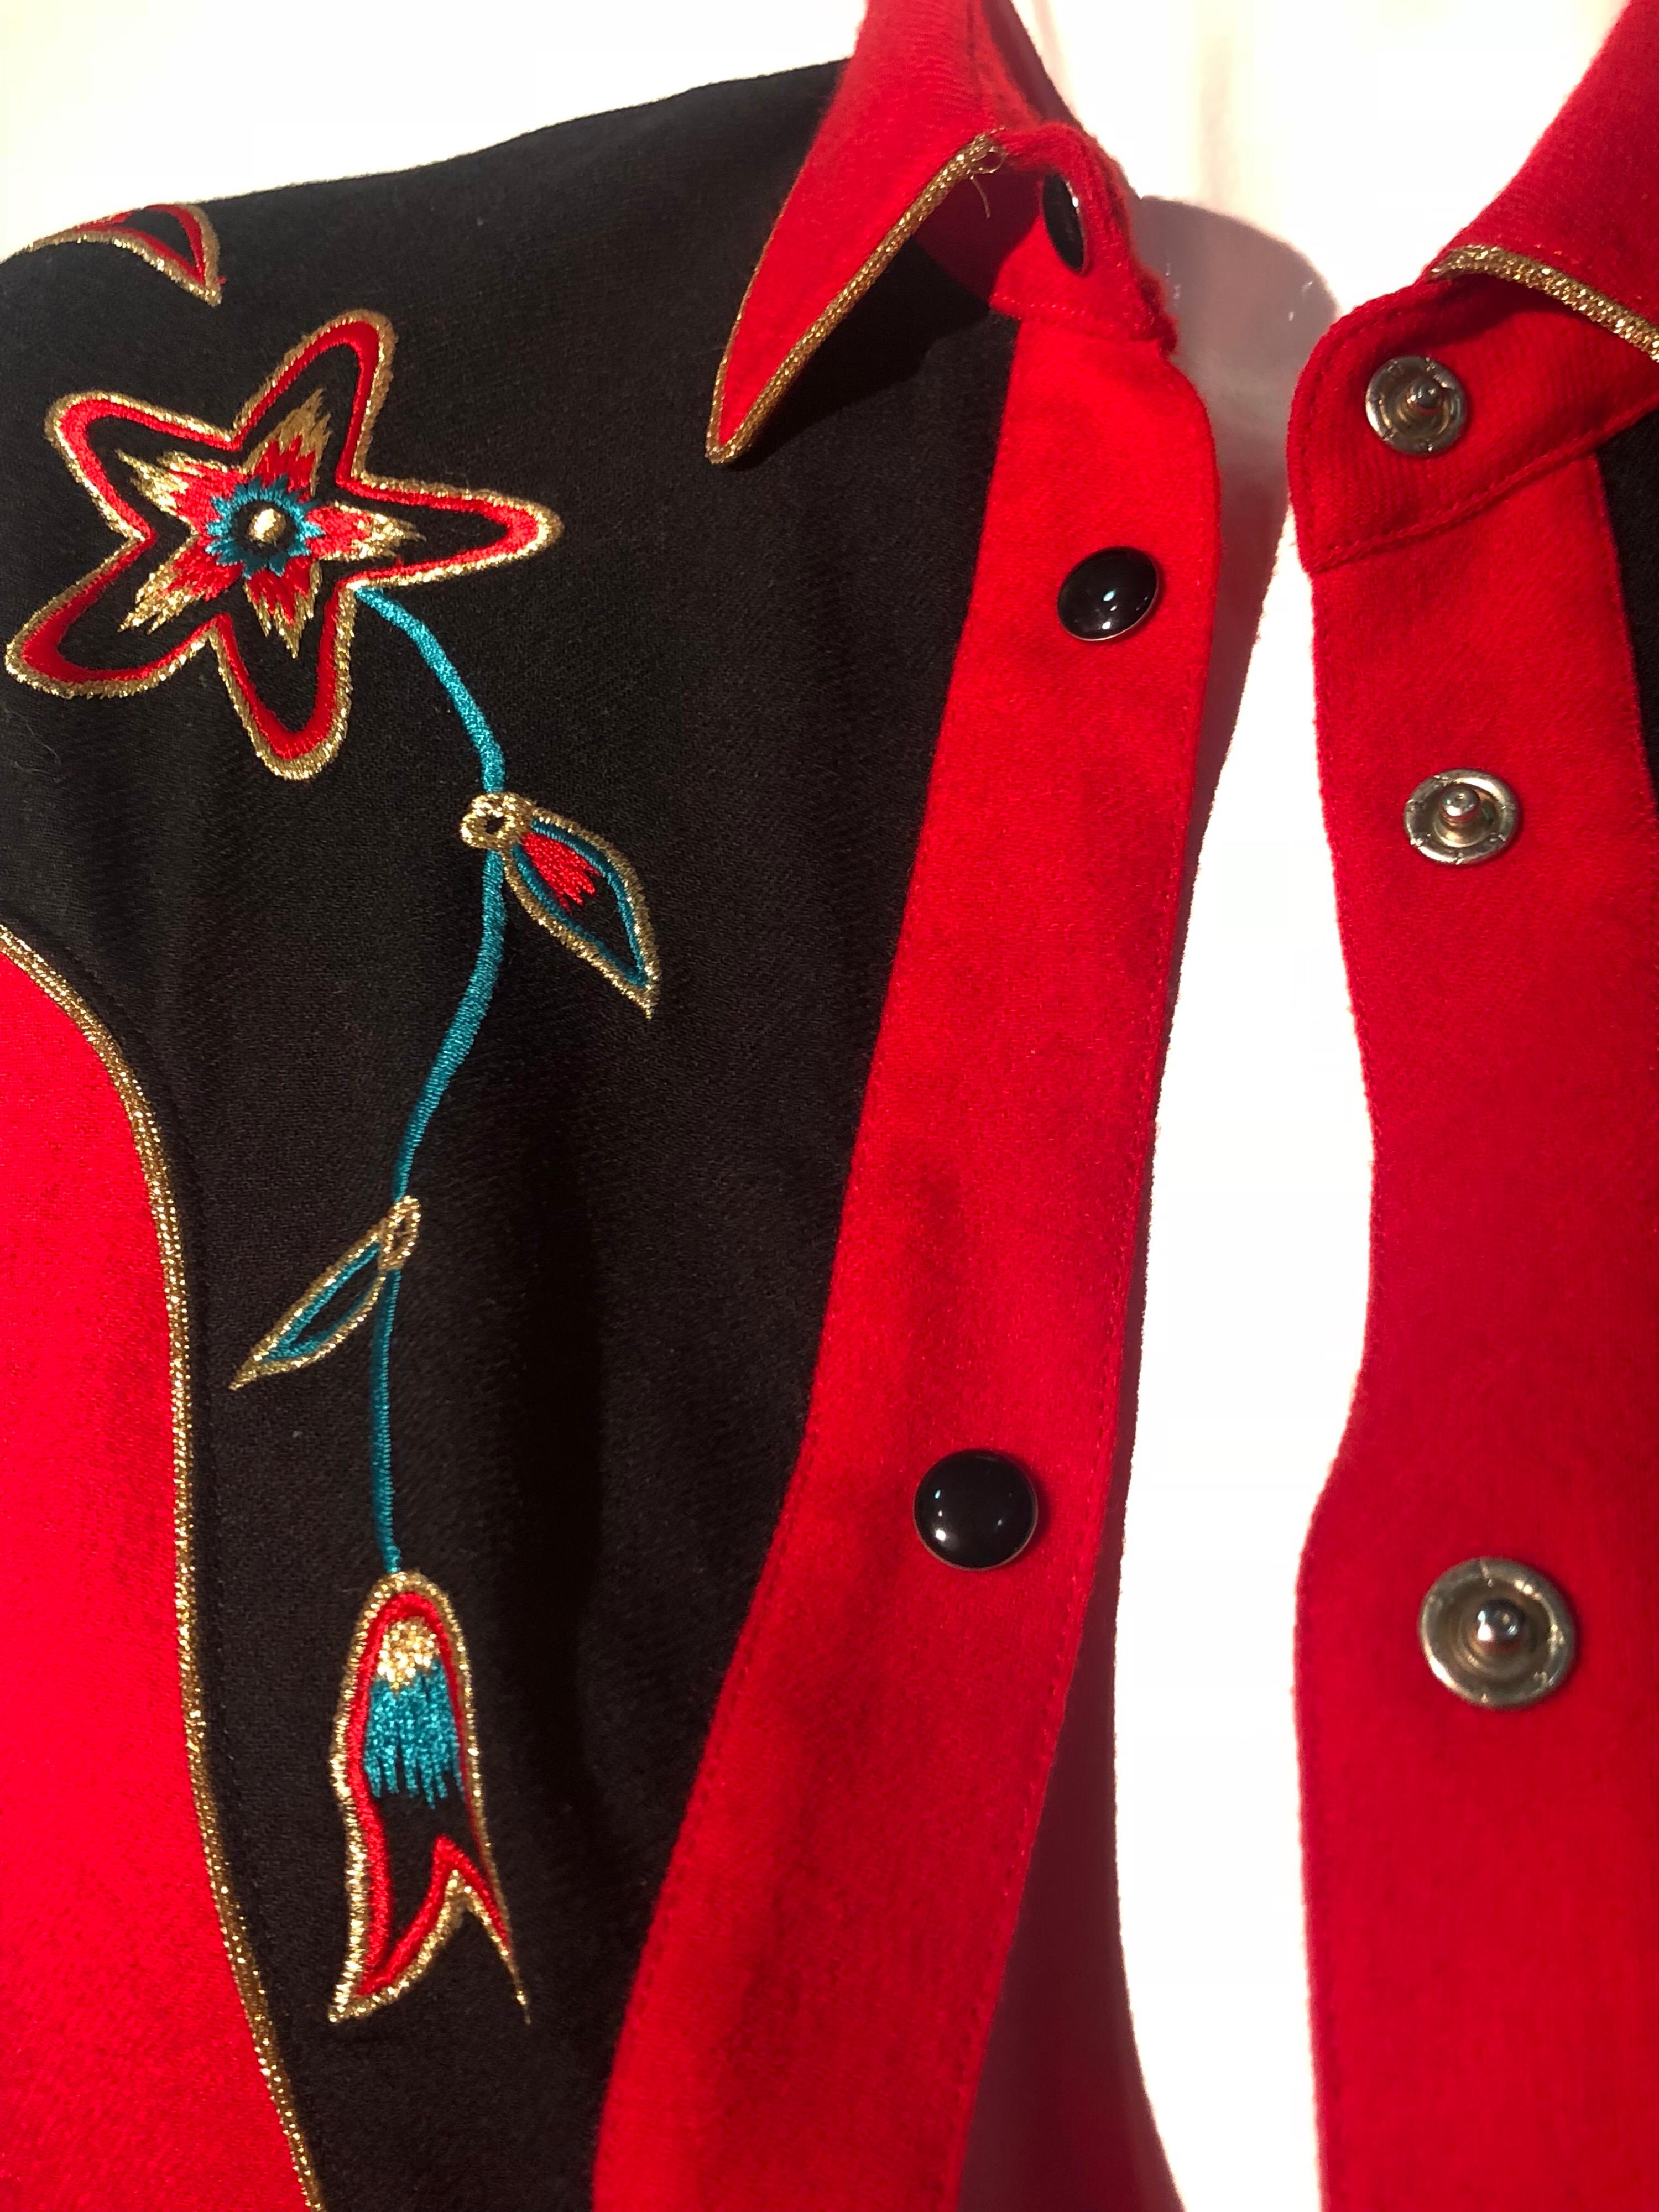 Women's or Men's 1980s Kansai Yamamoto Retro-Styled Embroidered Western Shirt For Sale